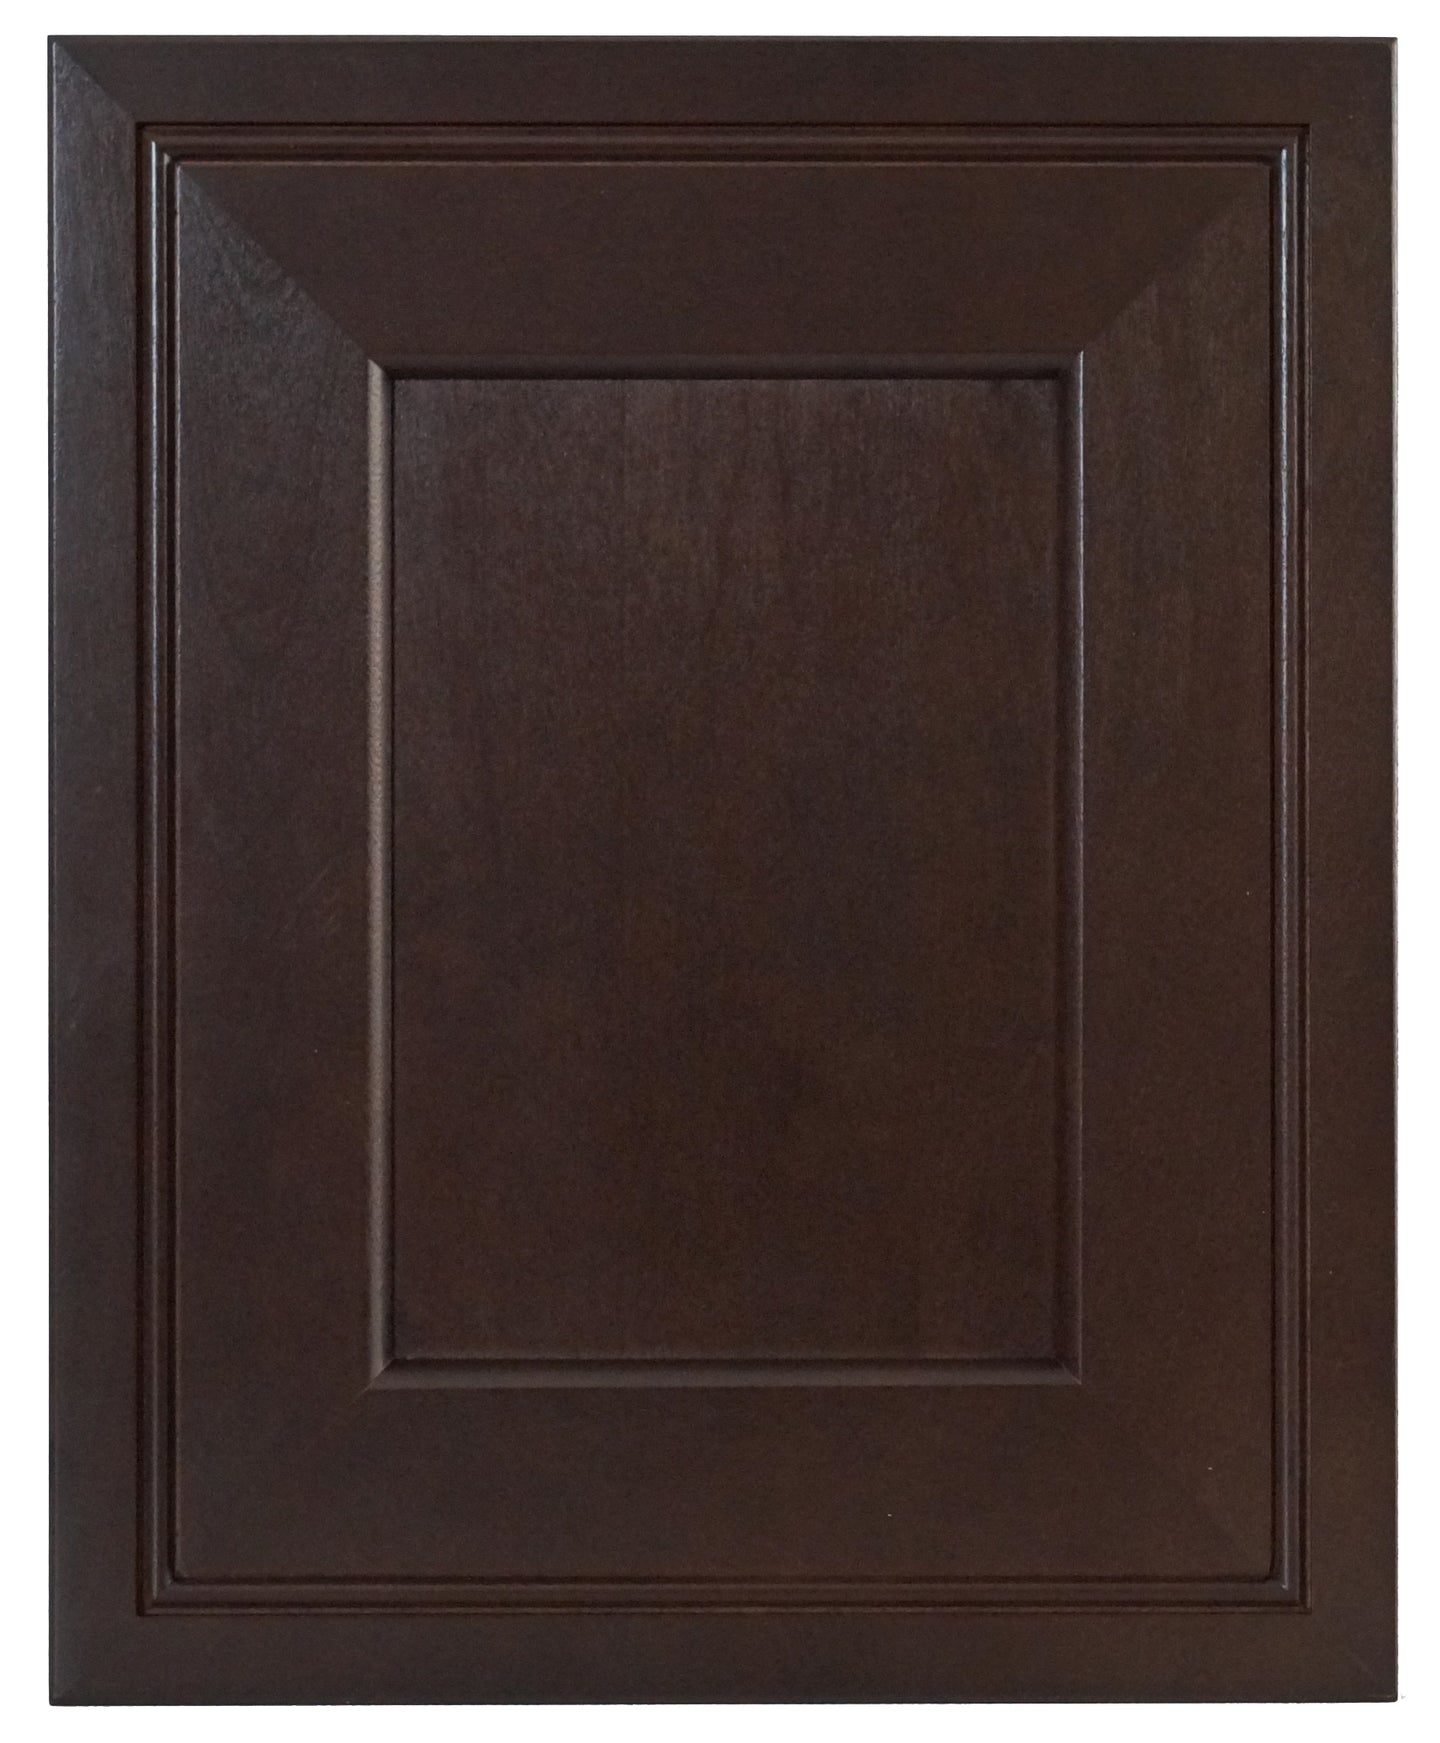 Espresso Contemporary Raised Panel Door - Quality Kitchens For Less